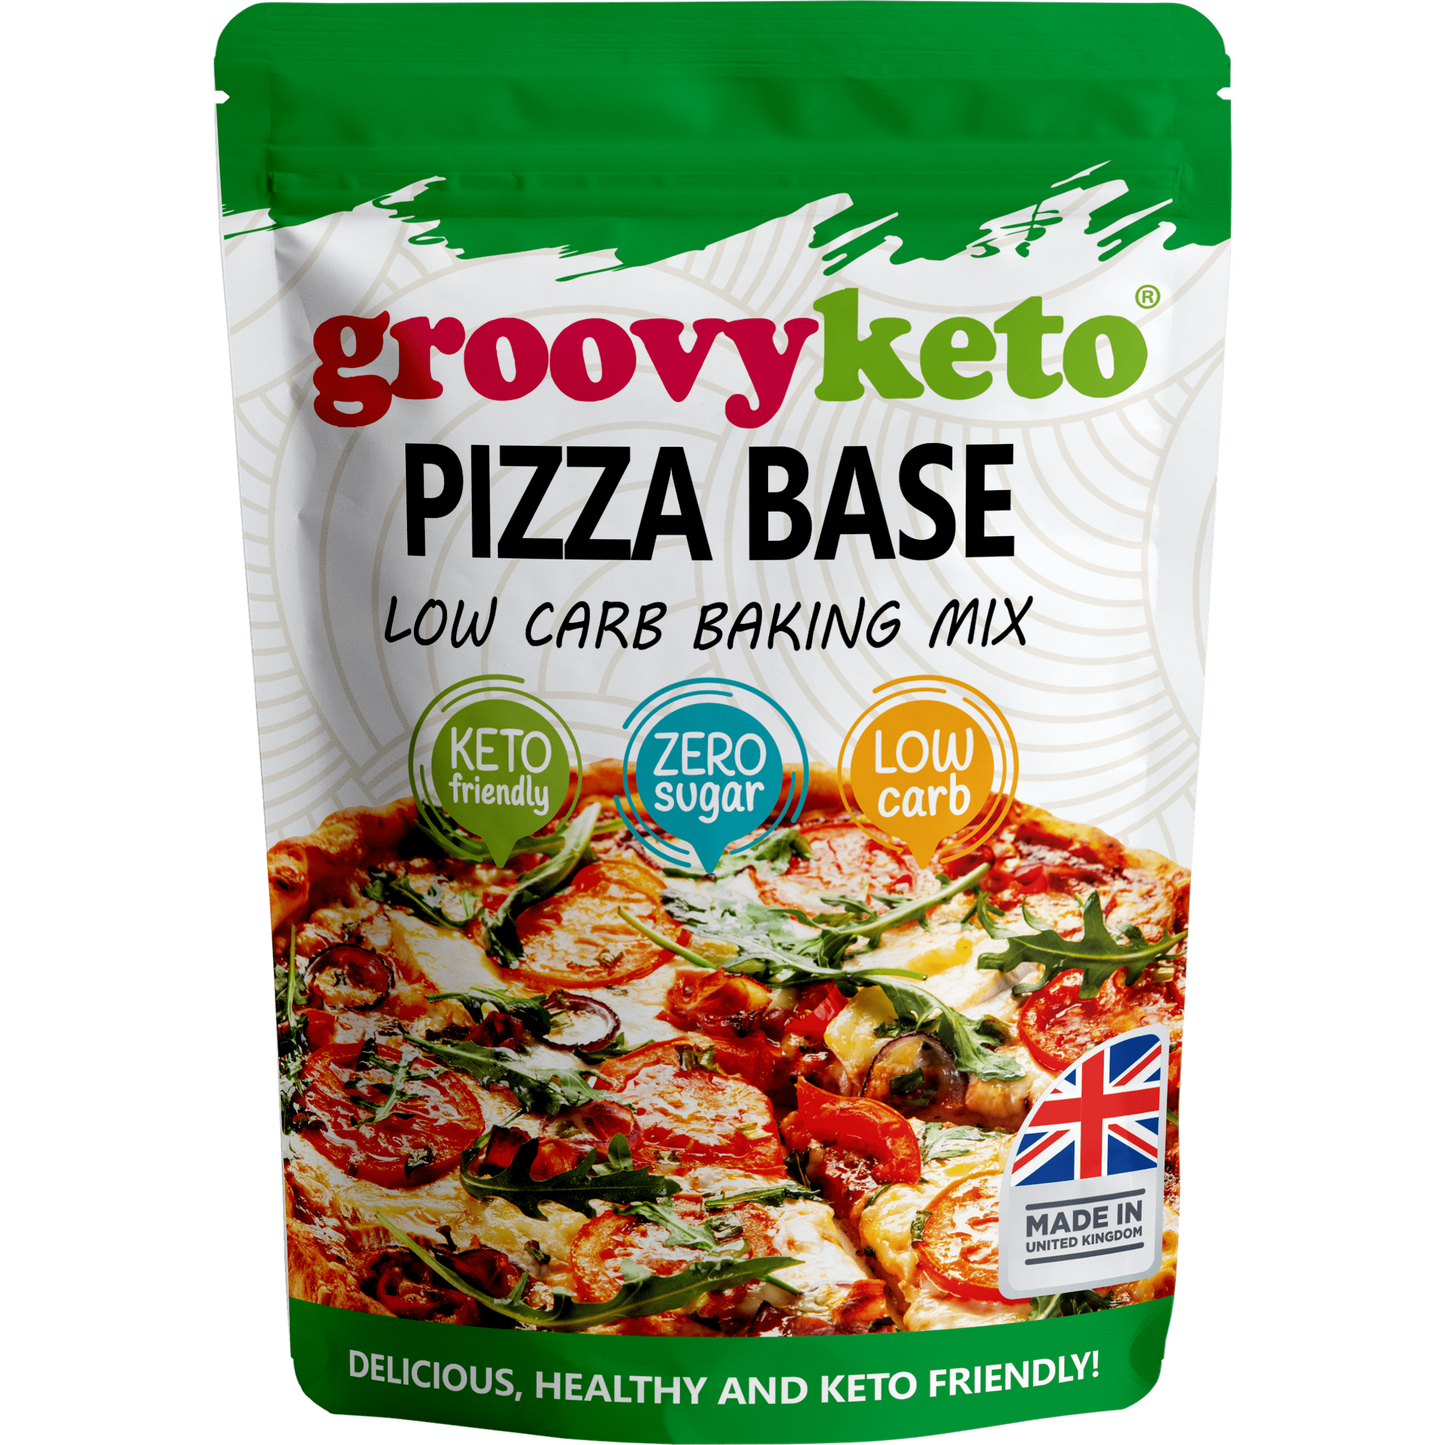 Groovy Keto Pizza Base Low Carb Baking Mix 260g